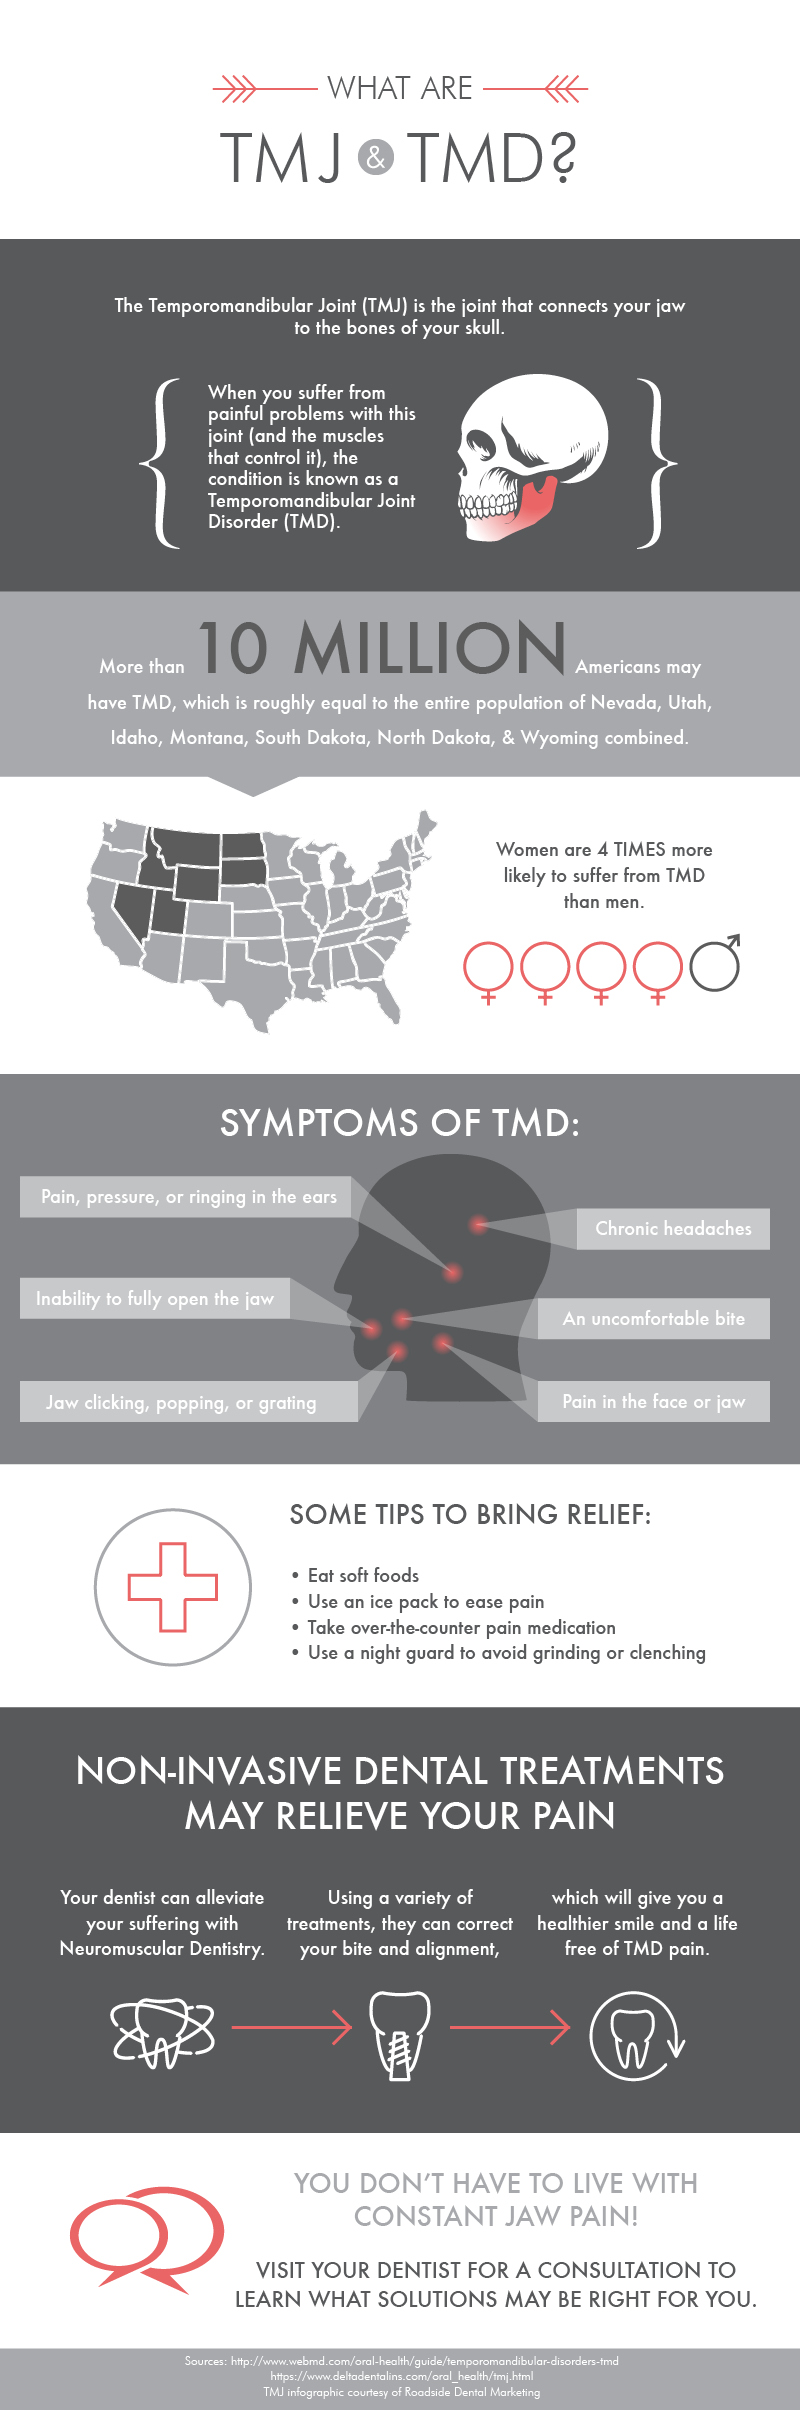 Find relief for frequent headaches with TMD treatment